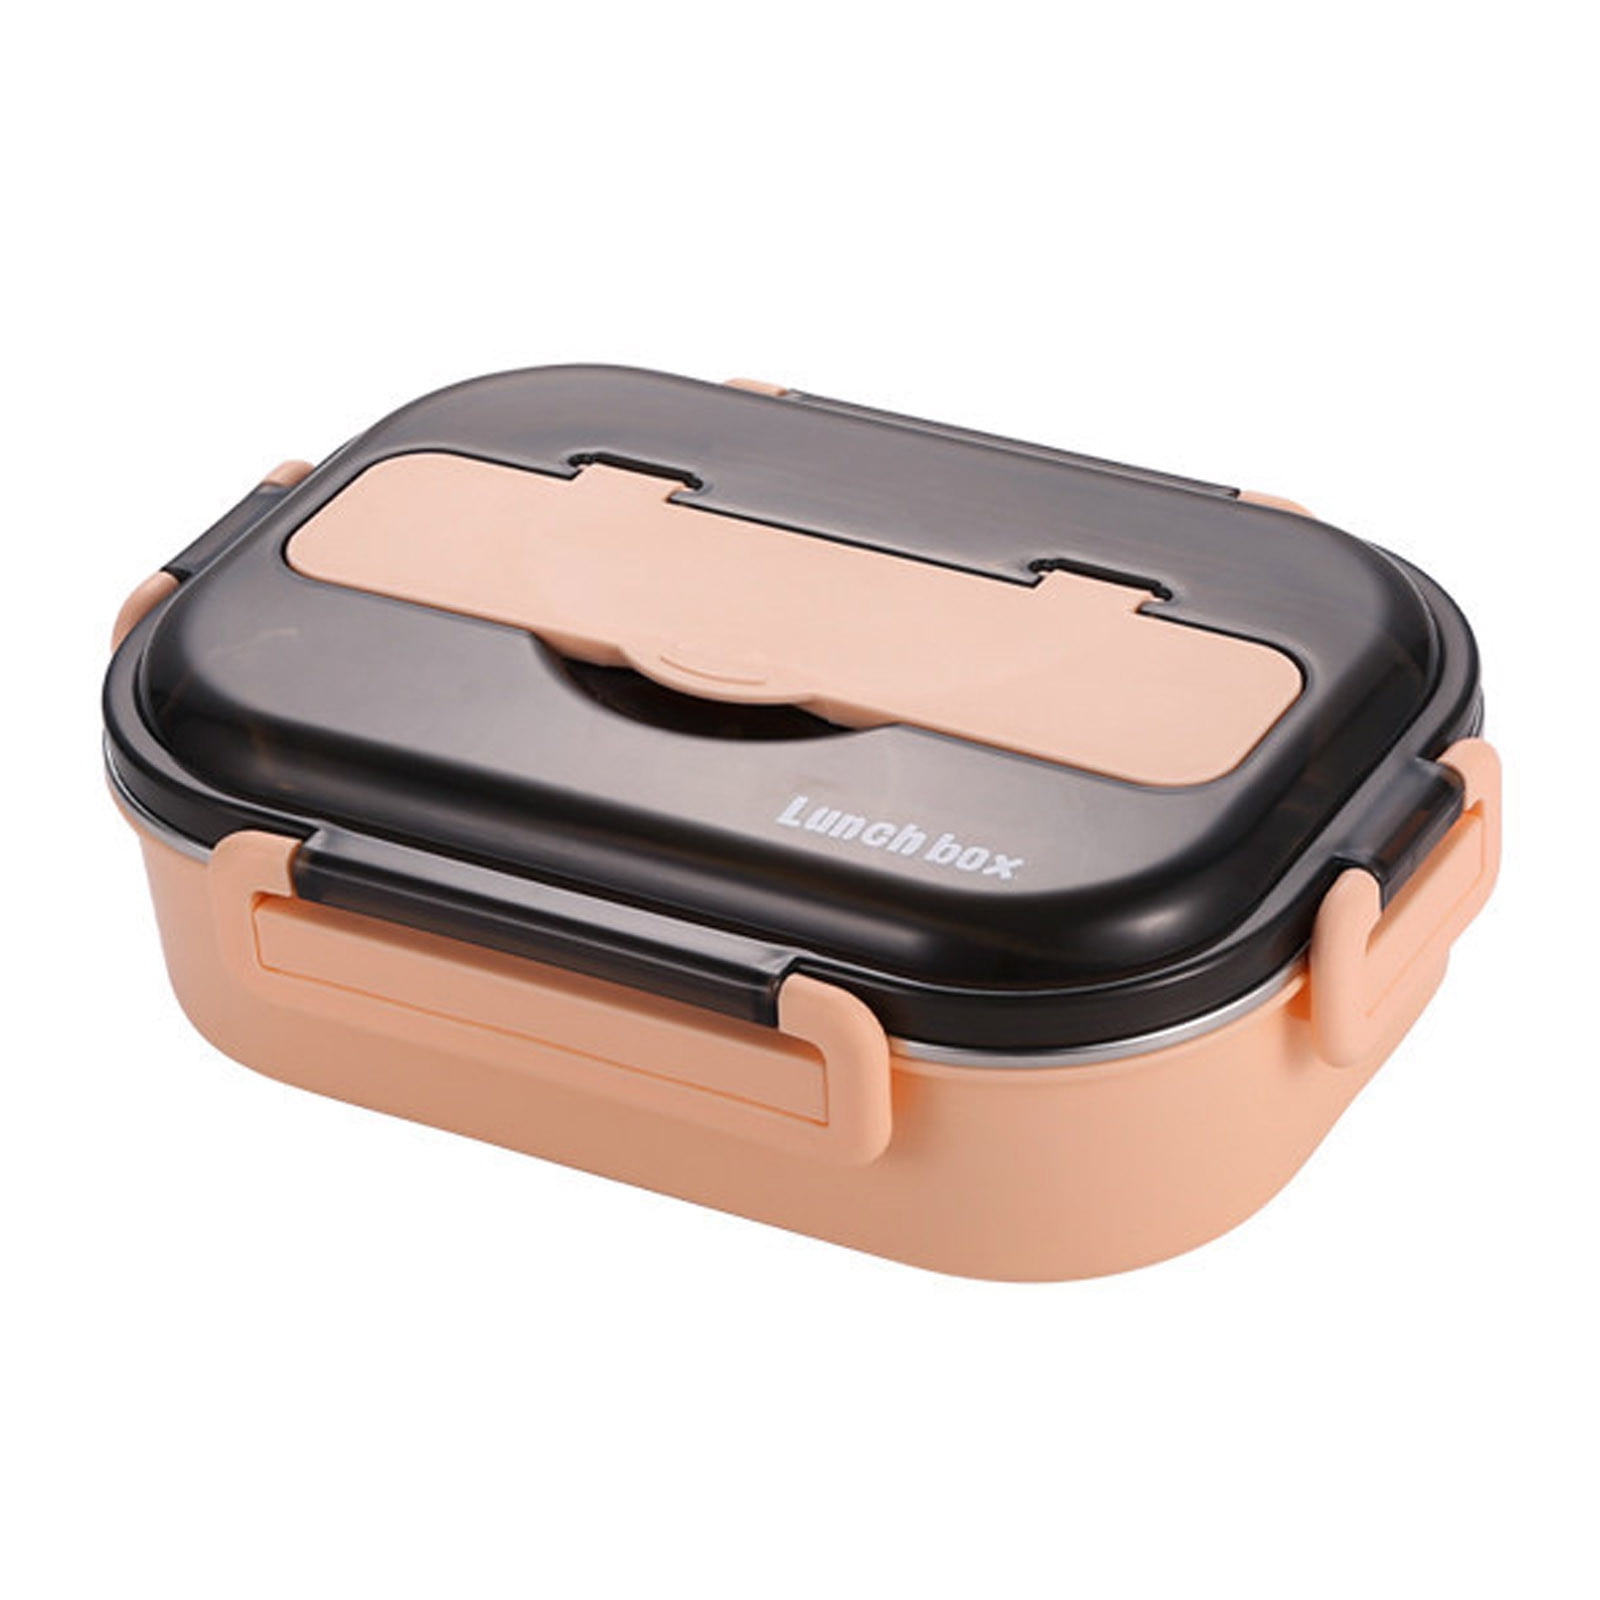 Stackable Lunch Box,YFBXG 3 Tier Stainless Steel Thermal Bento